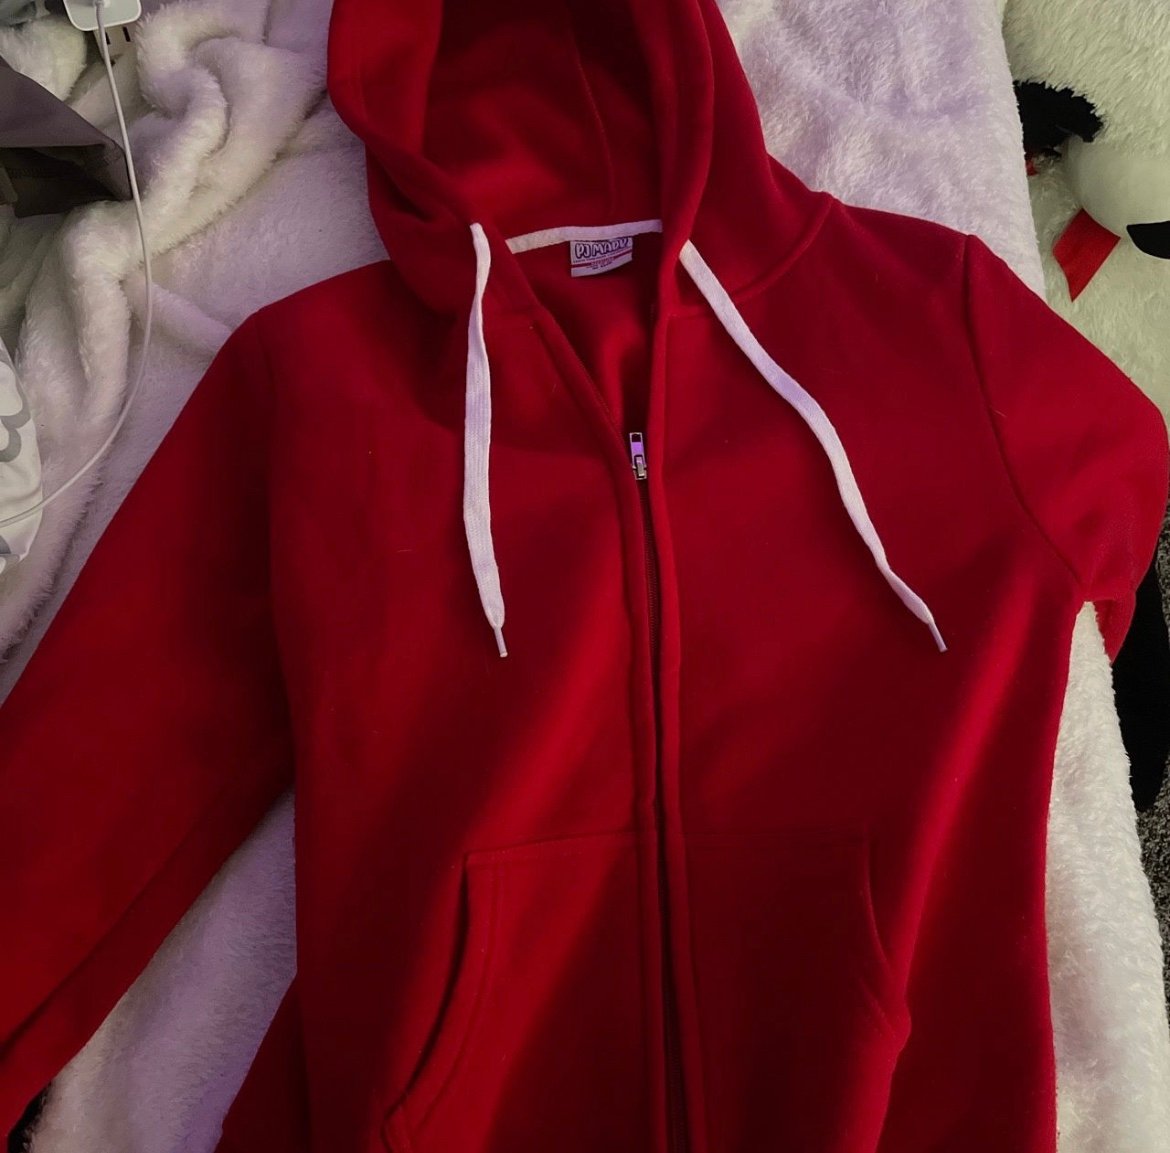 Promotions  red zip up hoodie kNUnyoI6v Online Shop